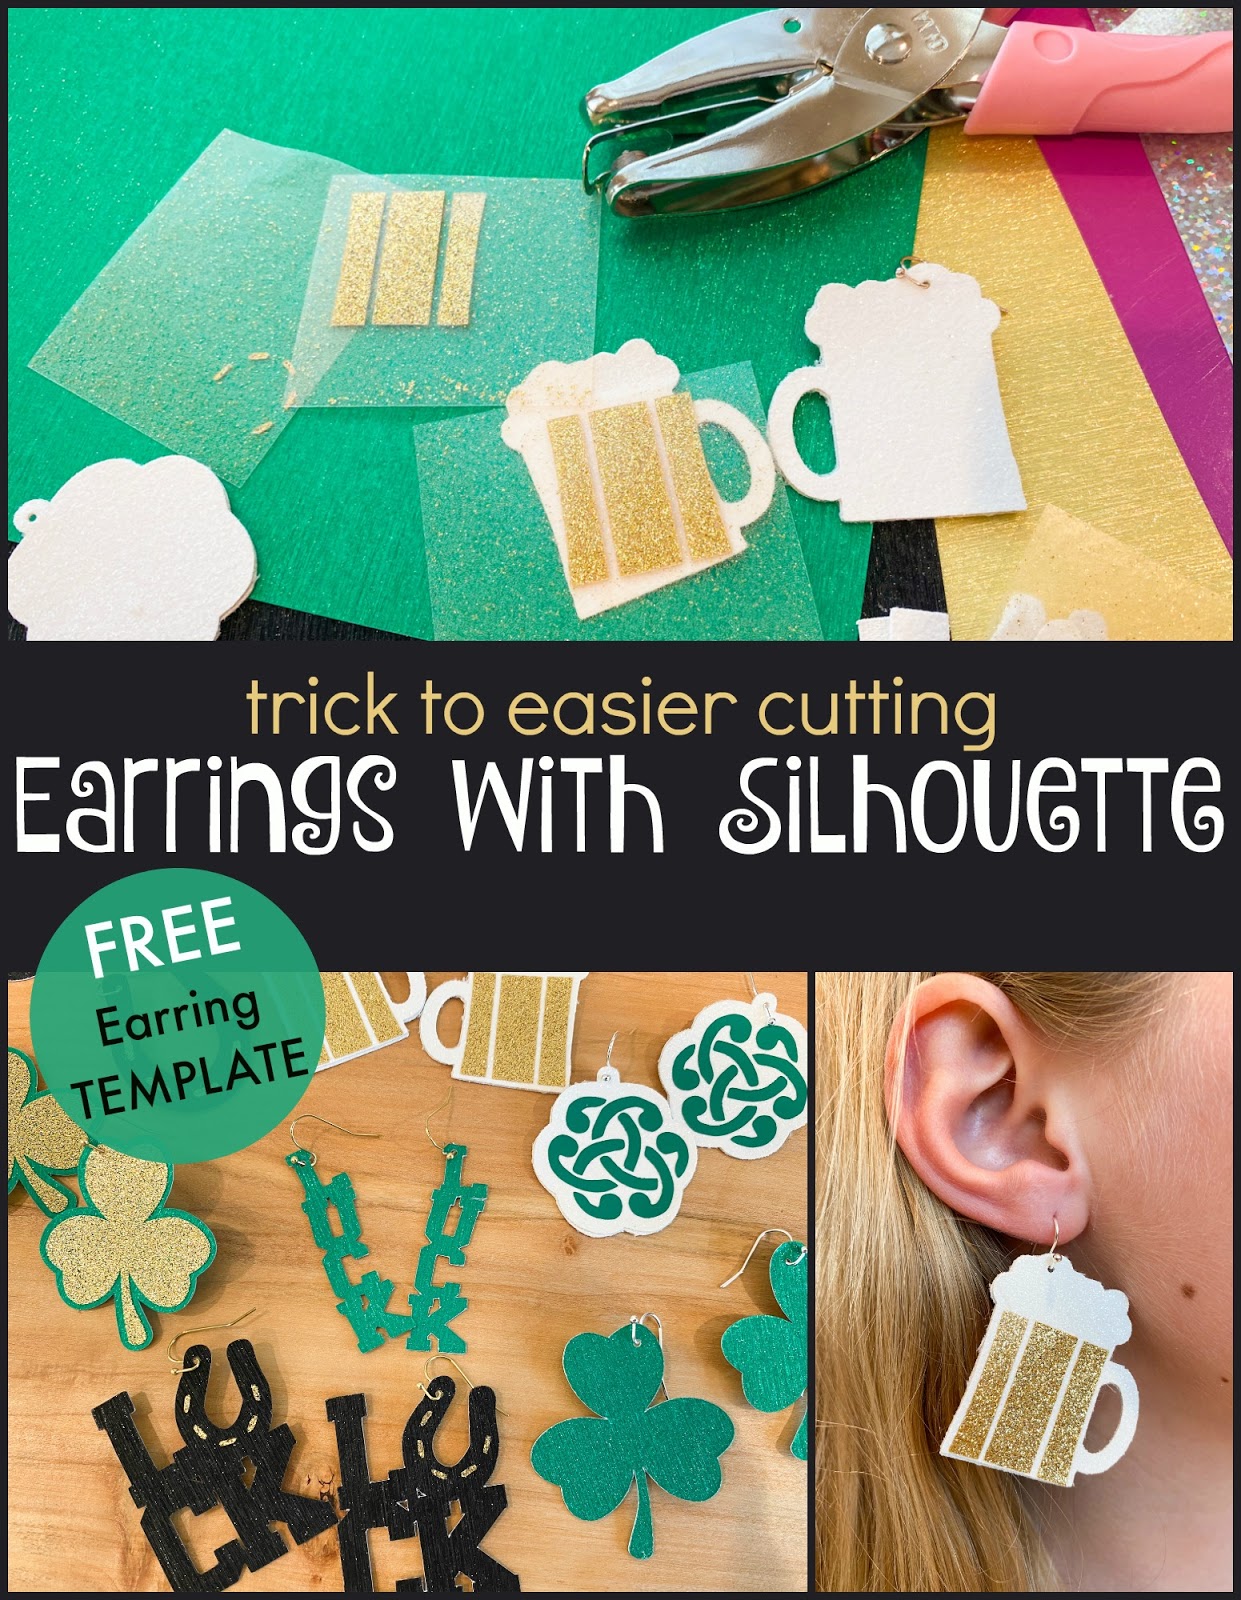 Download Free Faux Leather Earring Template And Secret To Easier Cutting On Silhouette Silhouette School SVG, PNG, EPS, DXF File